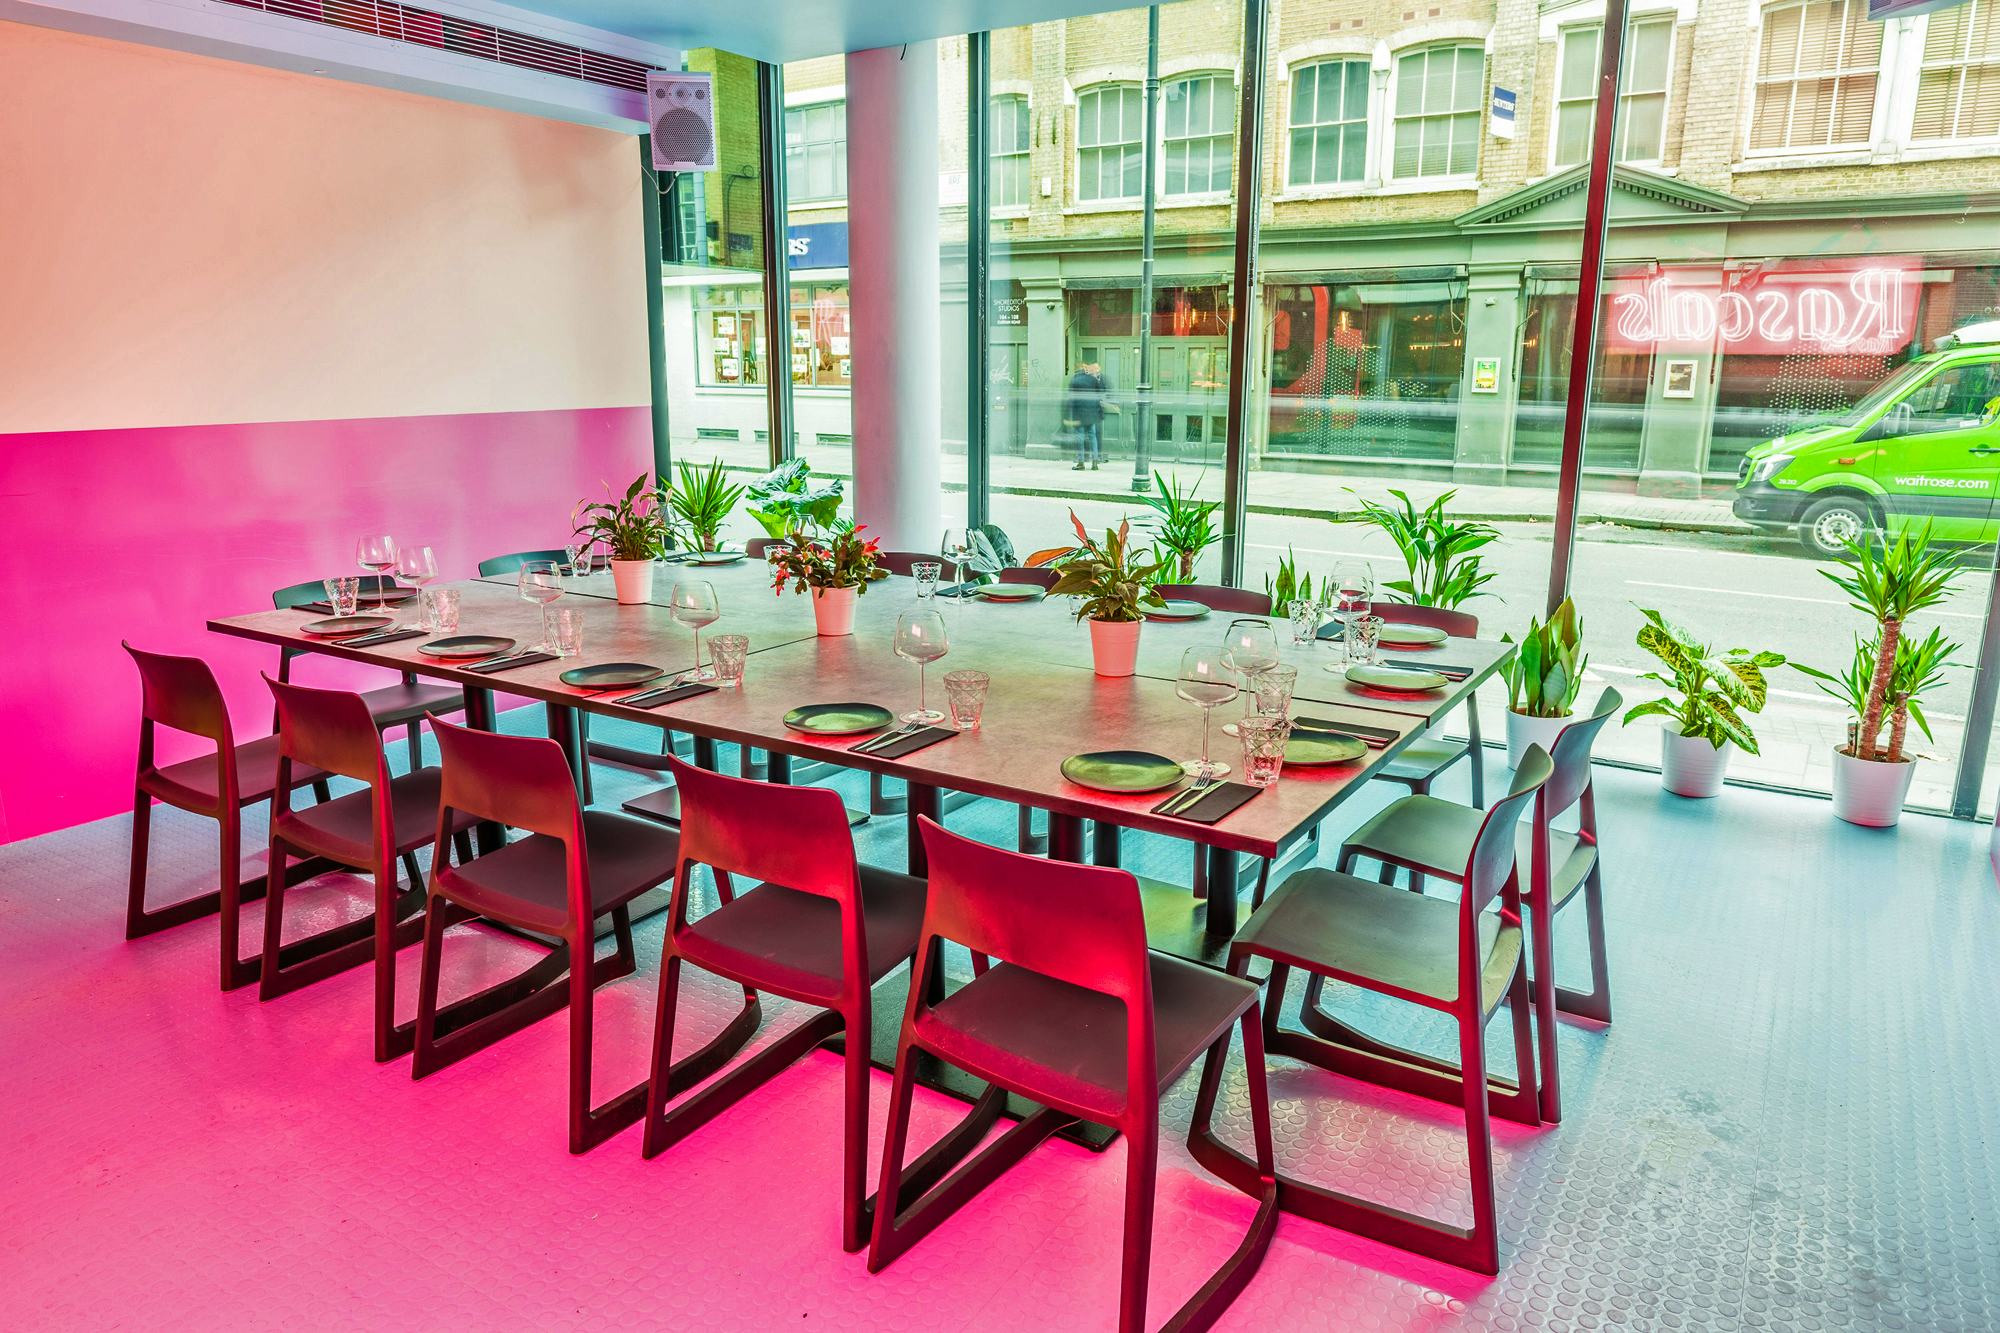 Rascals waterproof private dining room Shoreditch small plates restaurant seating water fights